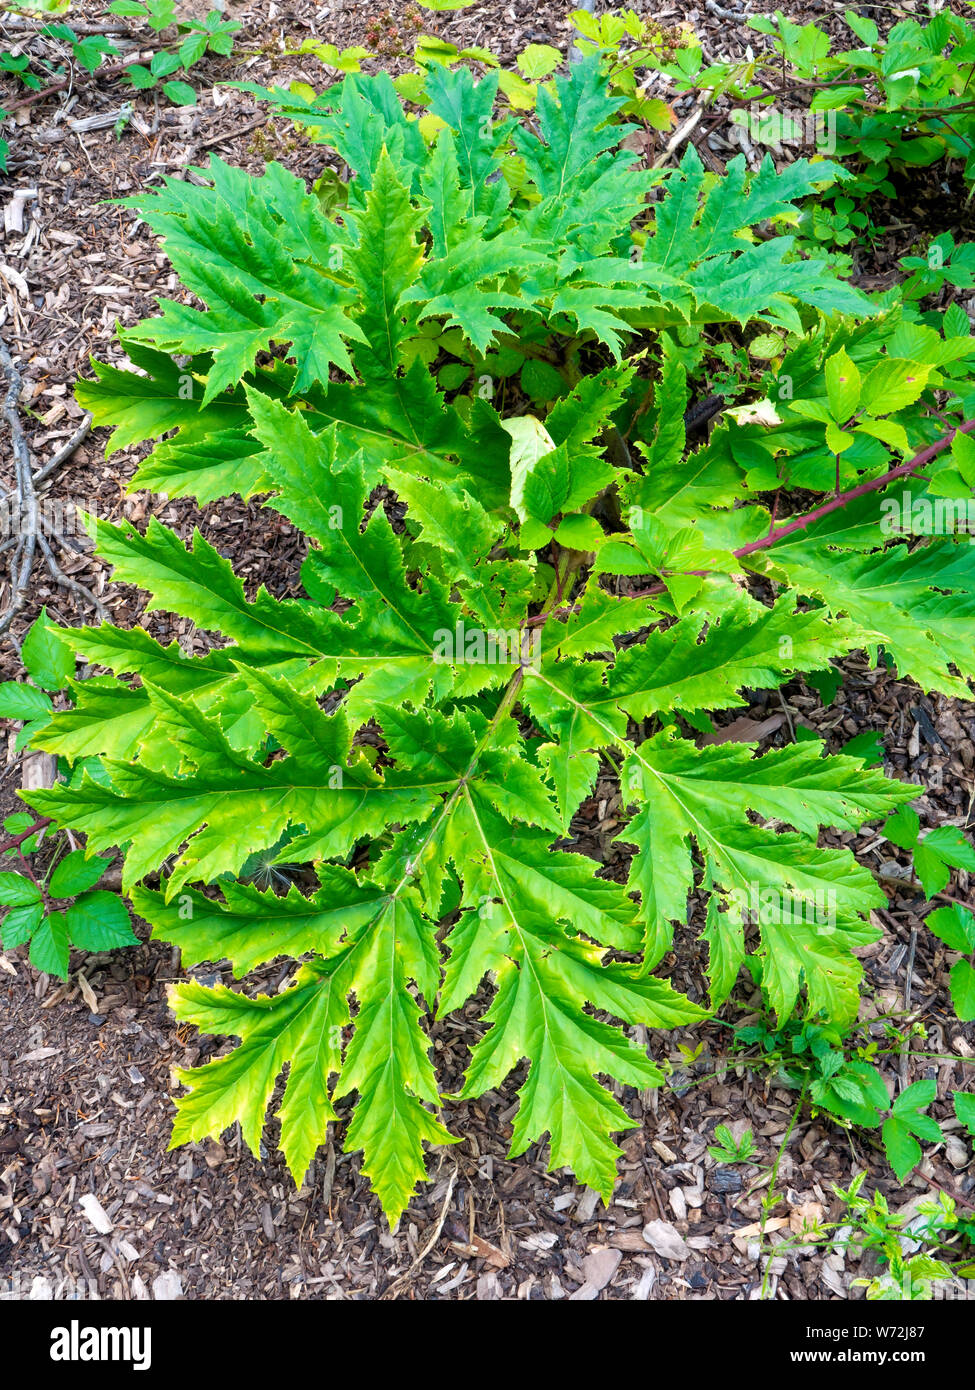 A small sample of the dangerously toxic plant Giant Hogweed or Heracleum mantegazzianum at Wynyard Co Durham UK Stock Photo